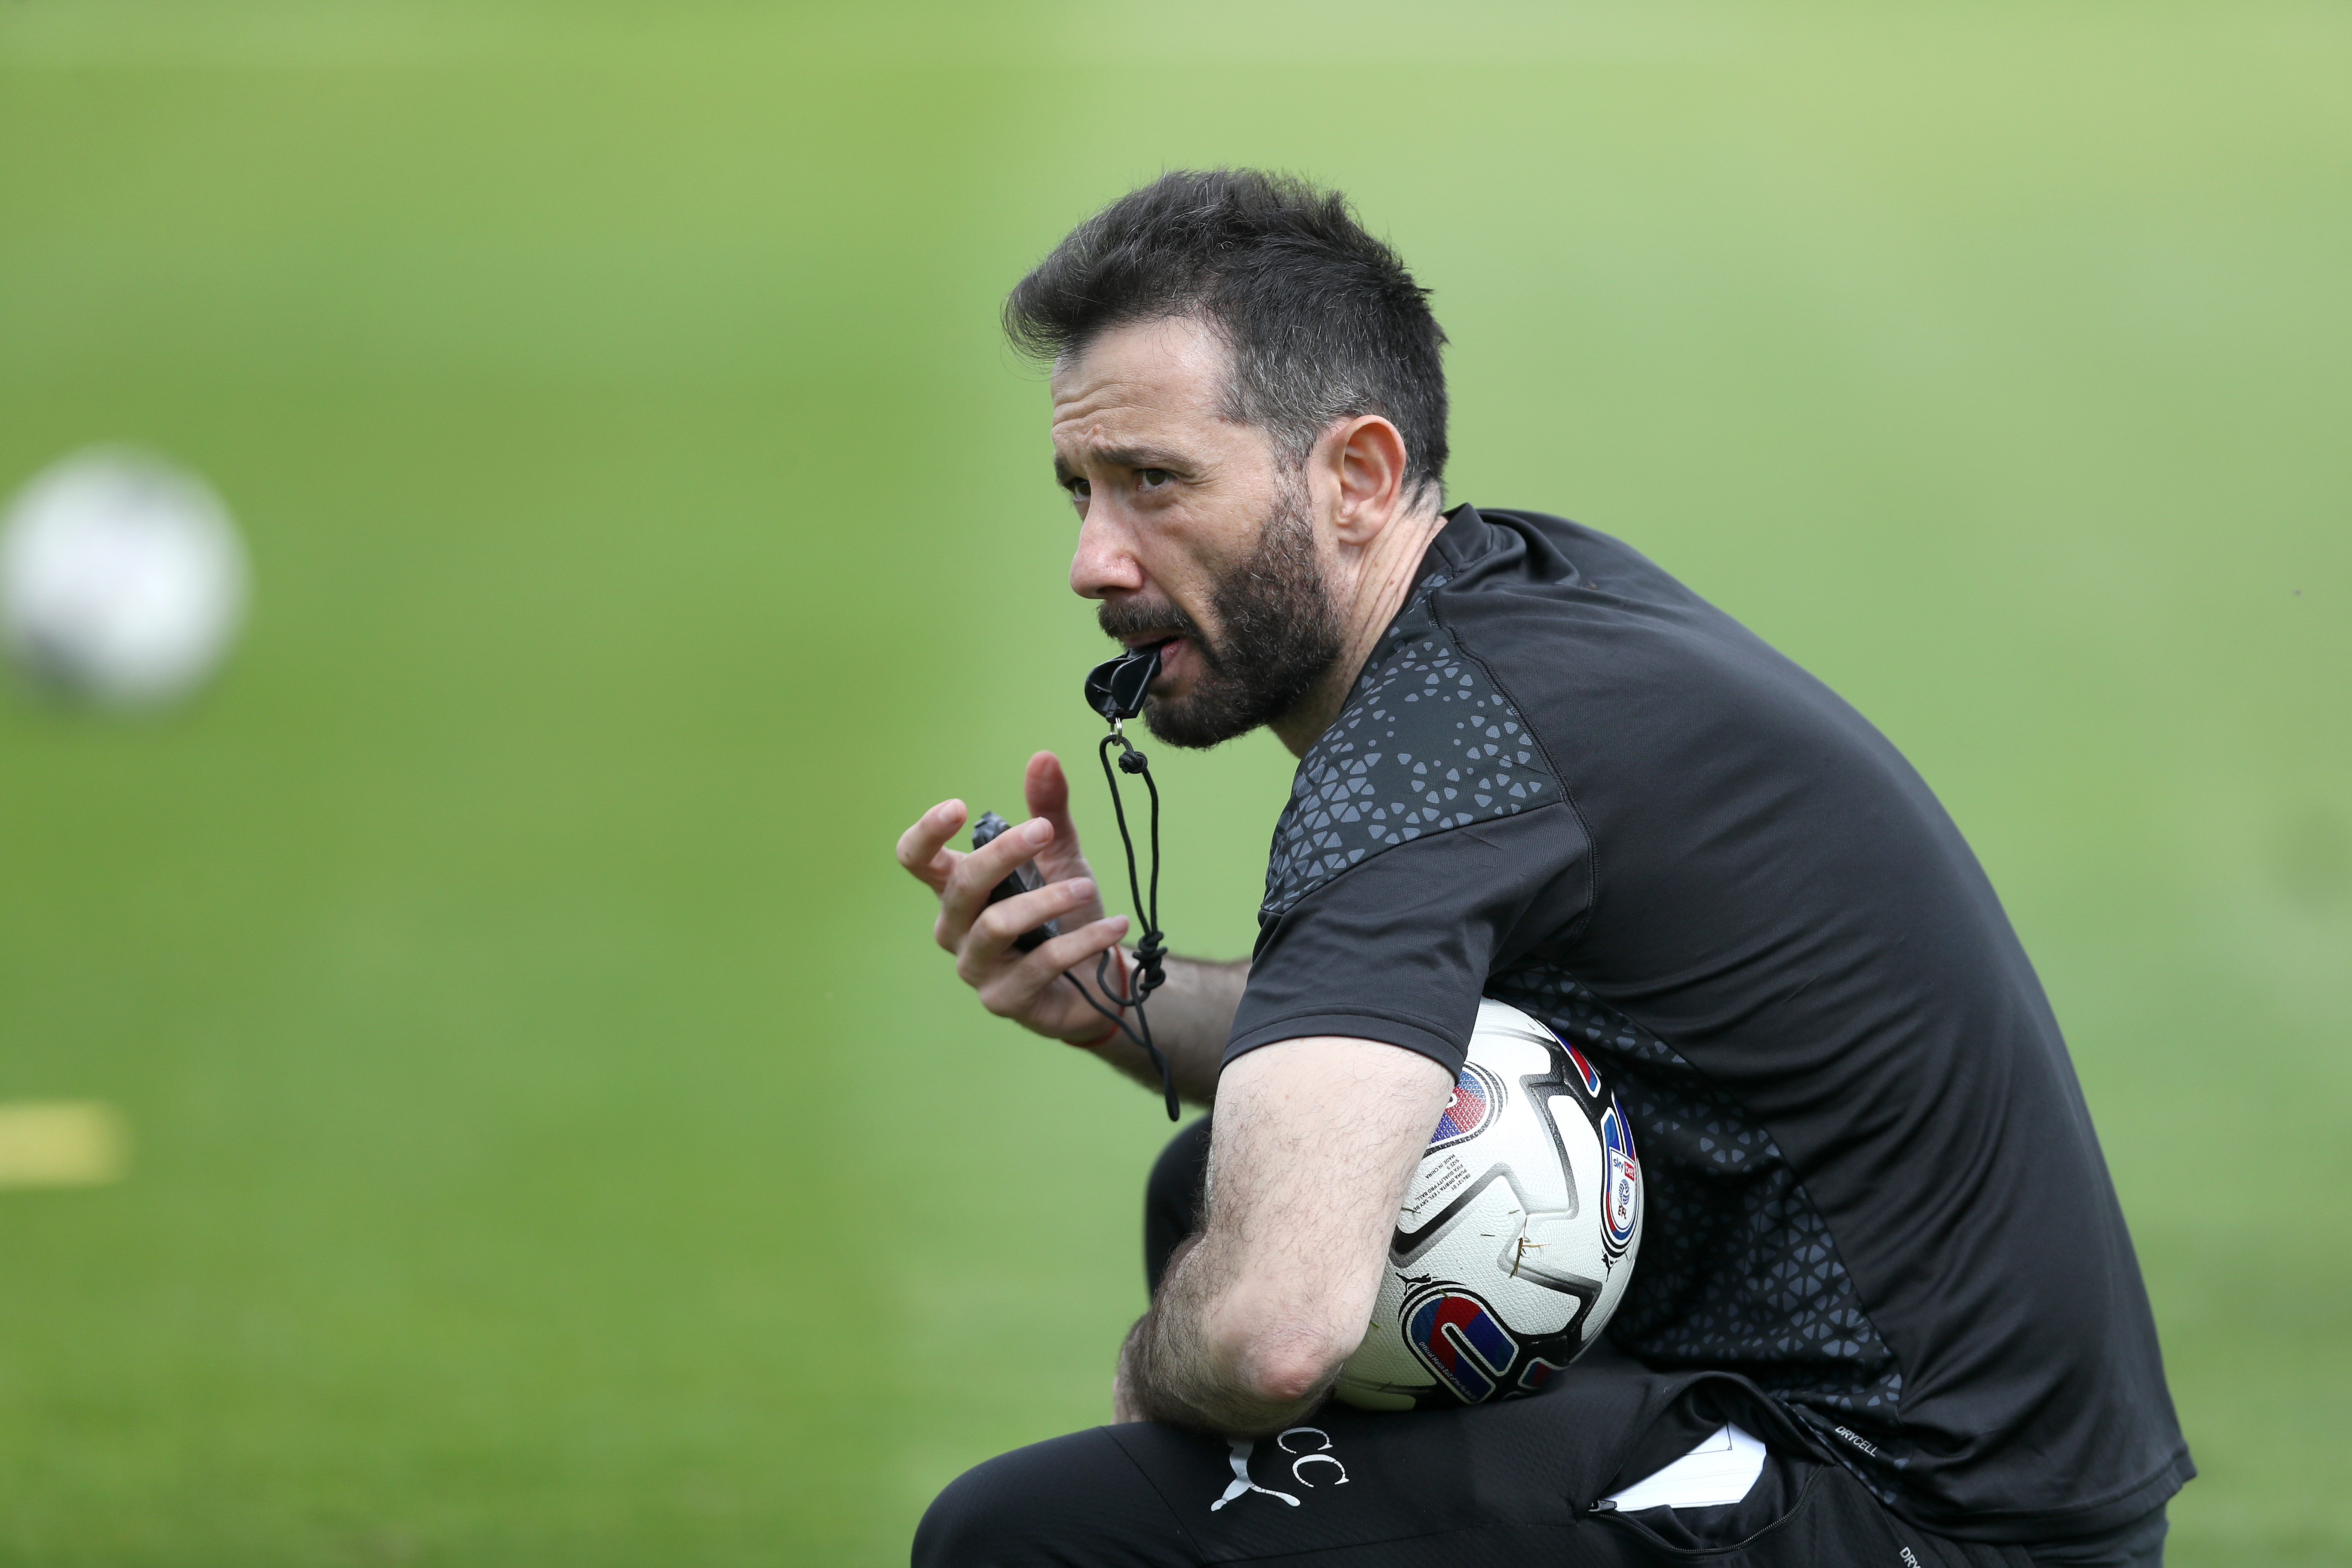 Carlos Corberán crouched down blowing a whistle while holding a ball during training 